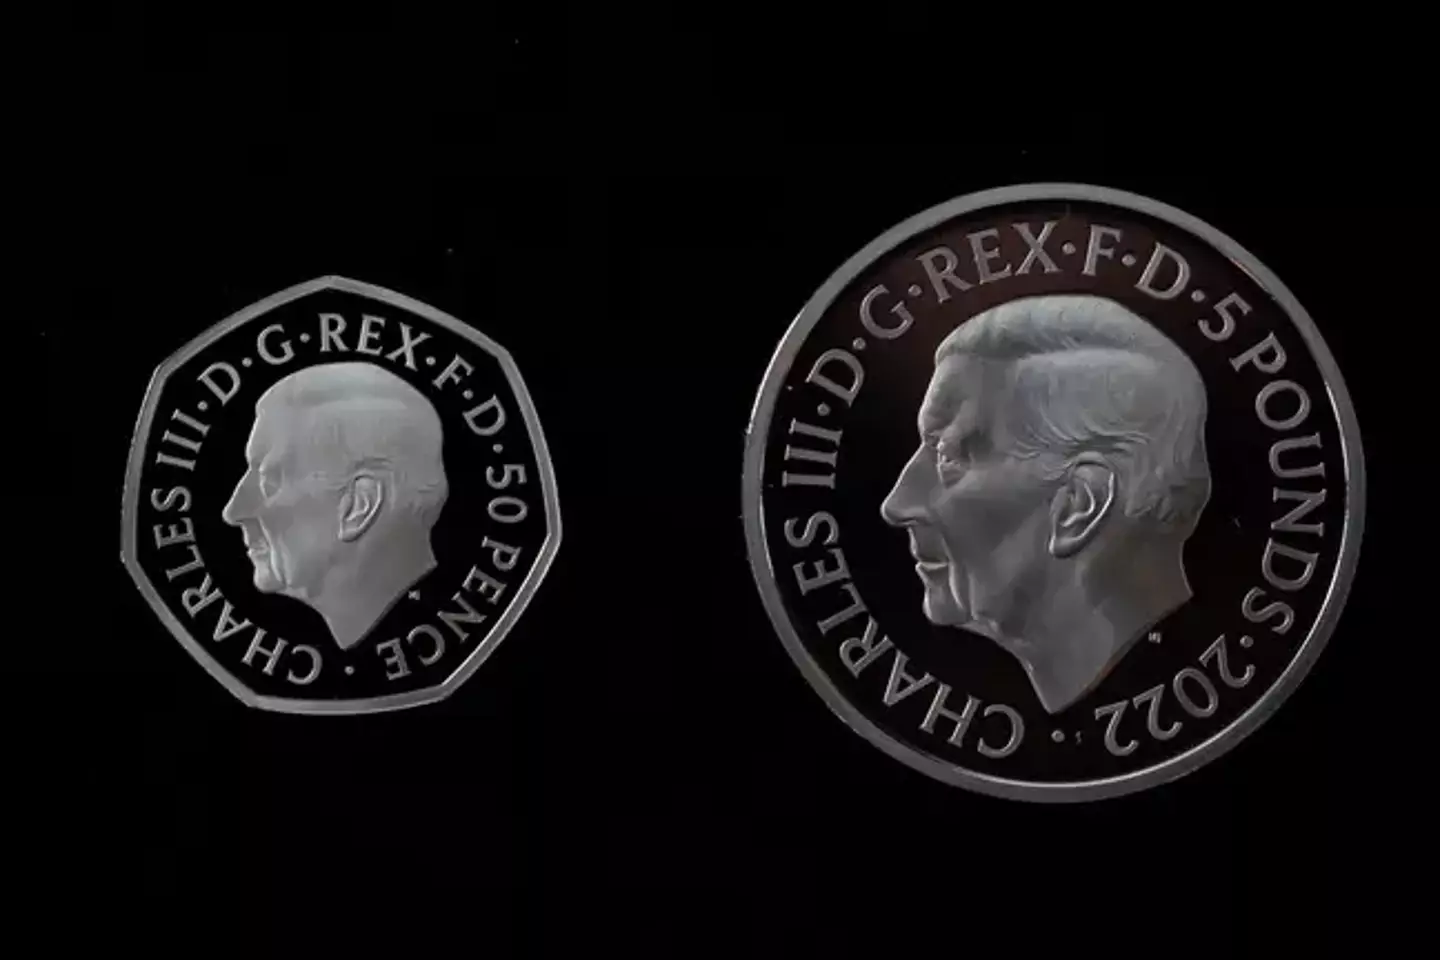 The new coins featuring King Charles III.